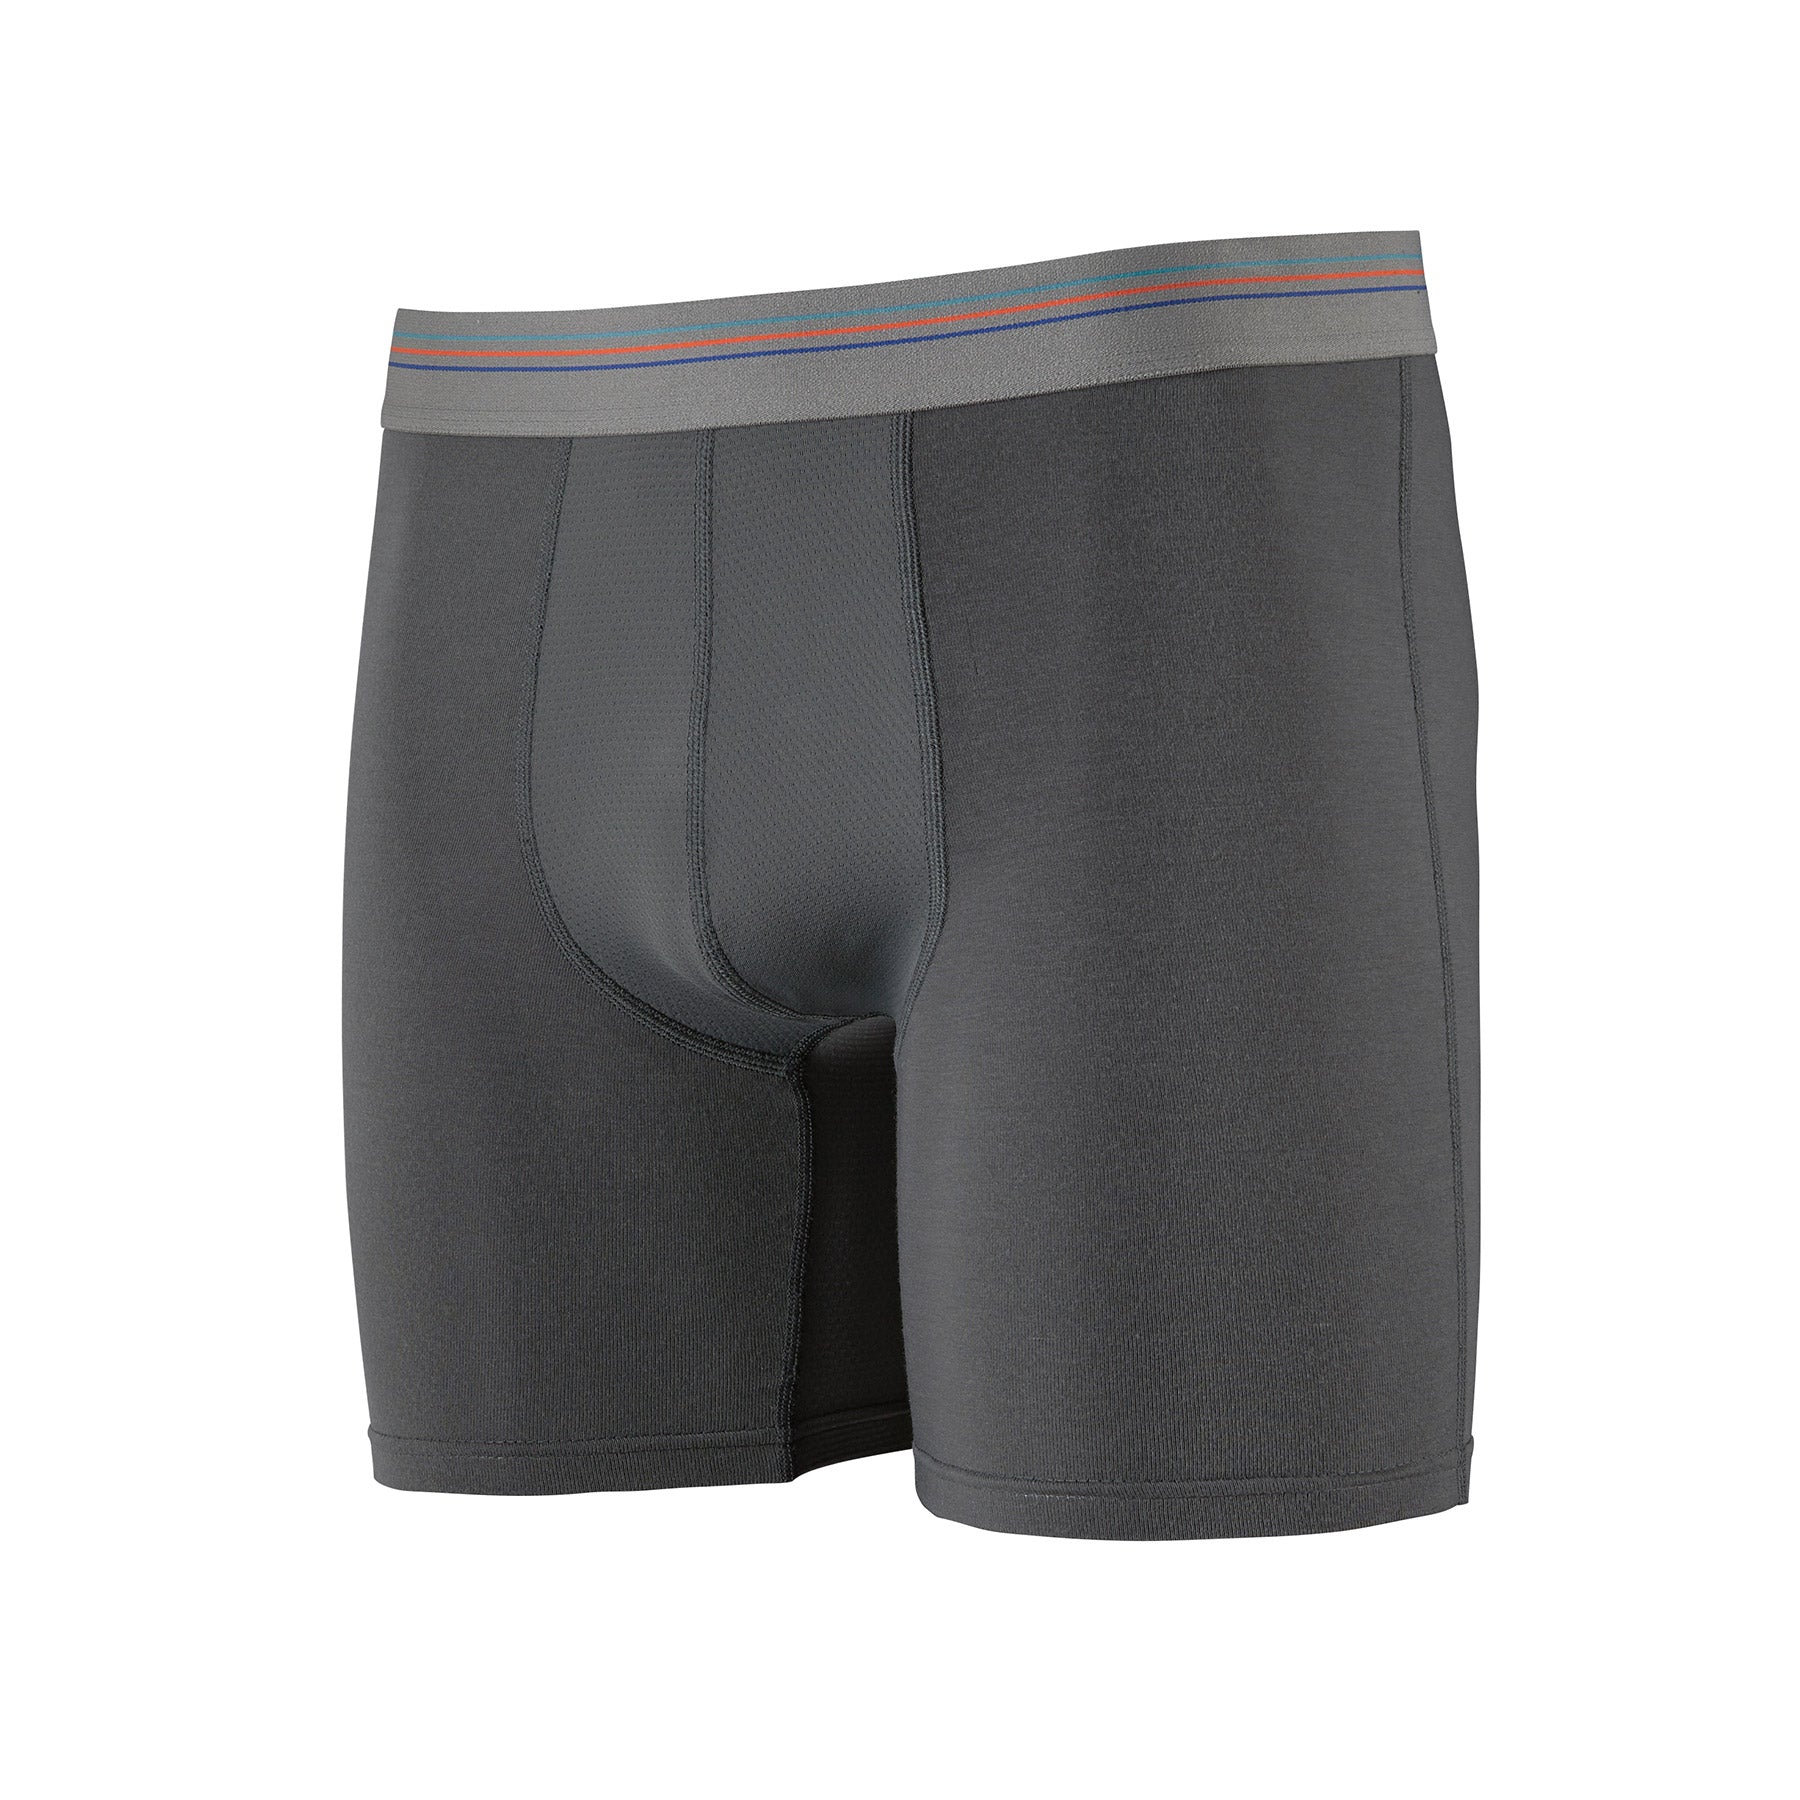 patagonia essential ac boxer briefs in forge grey front view